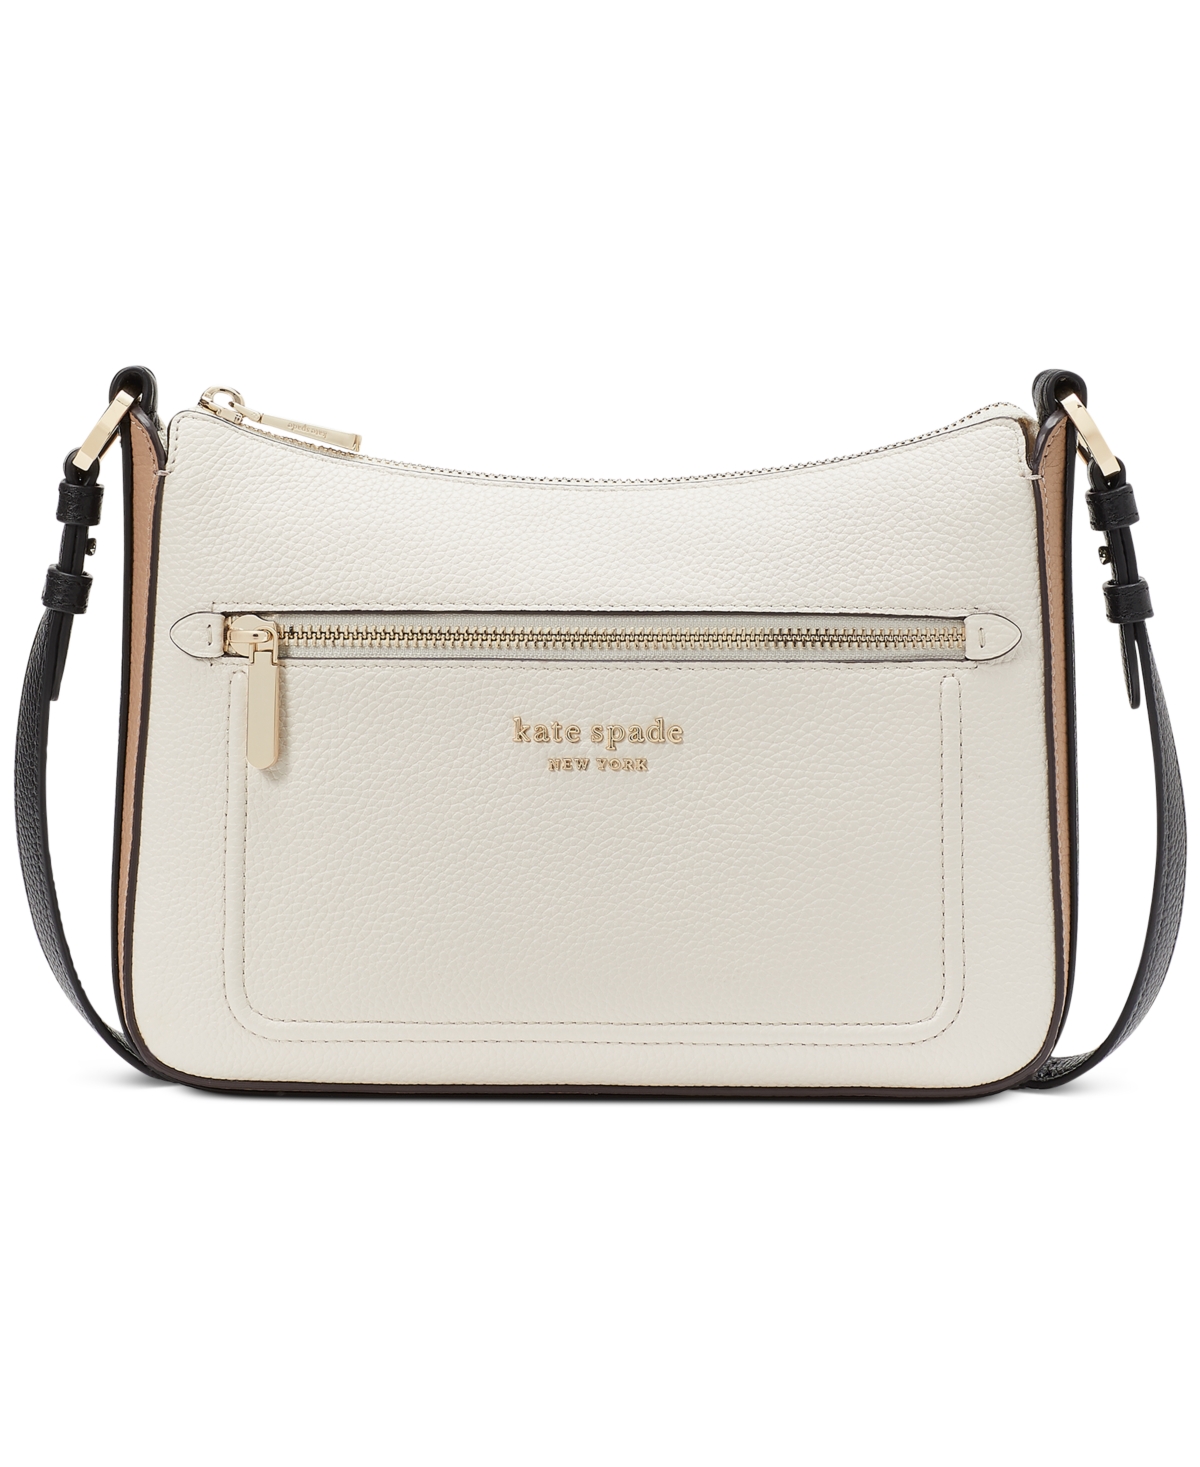 Kate Spade New York Hudson Colorblocked Pebbled Leather Small Crossbody In Parchment Multi